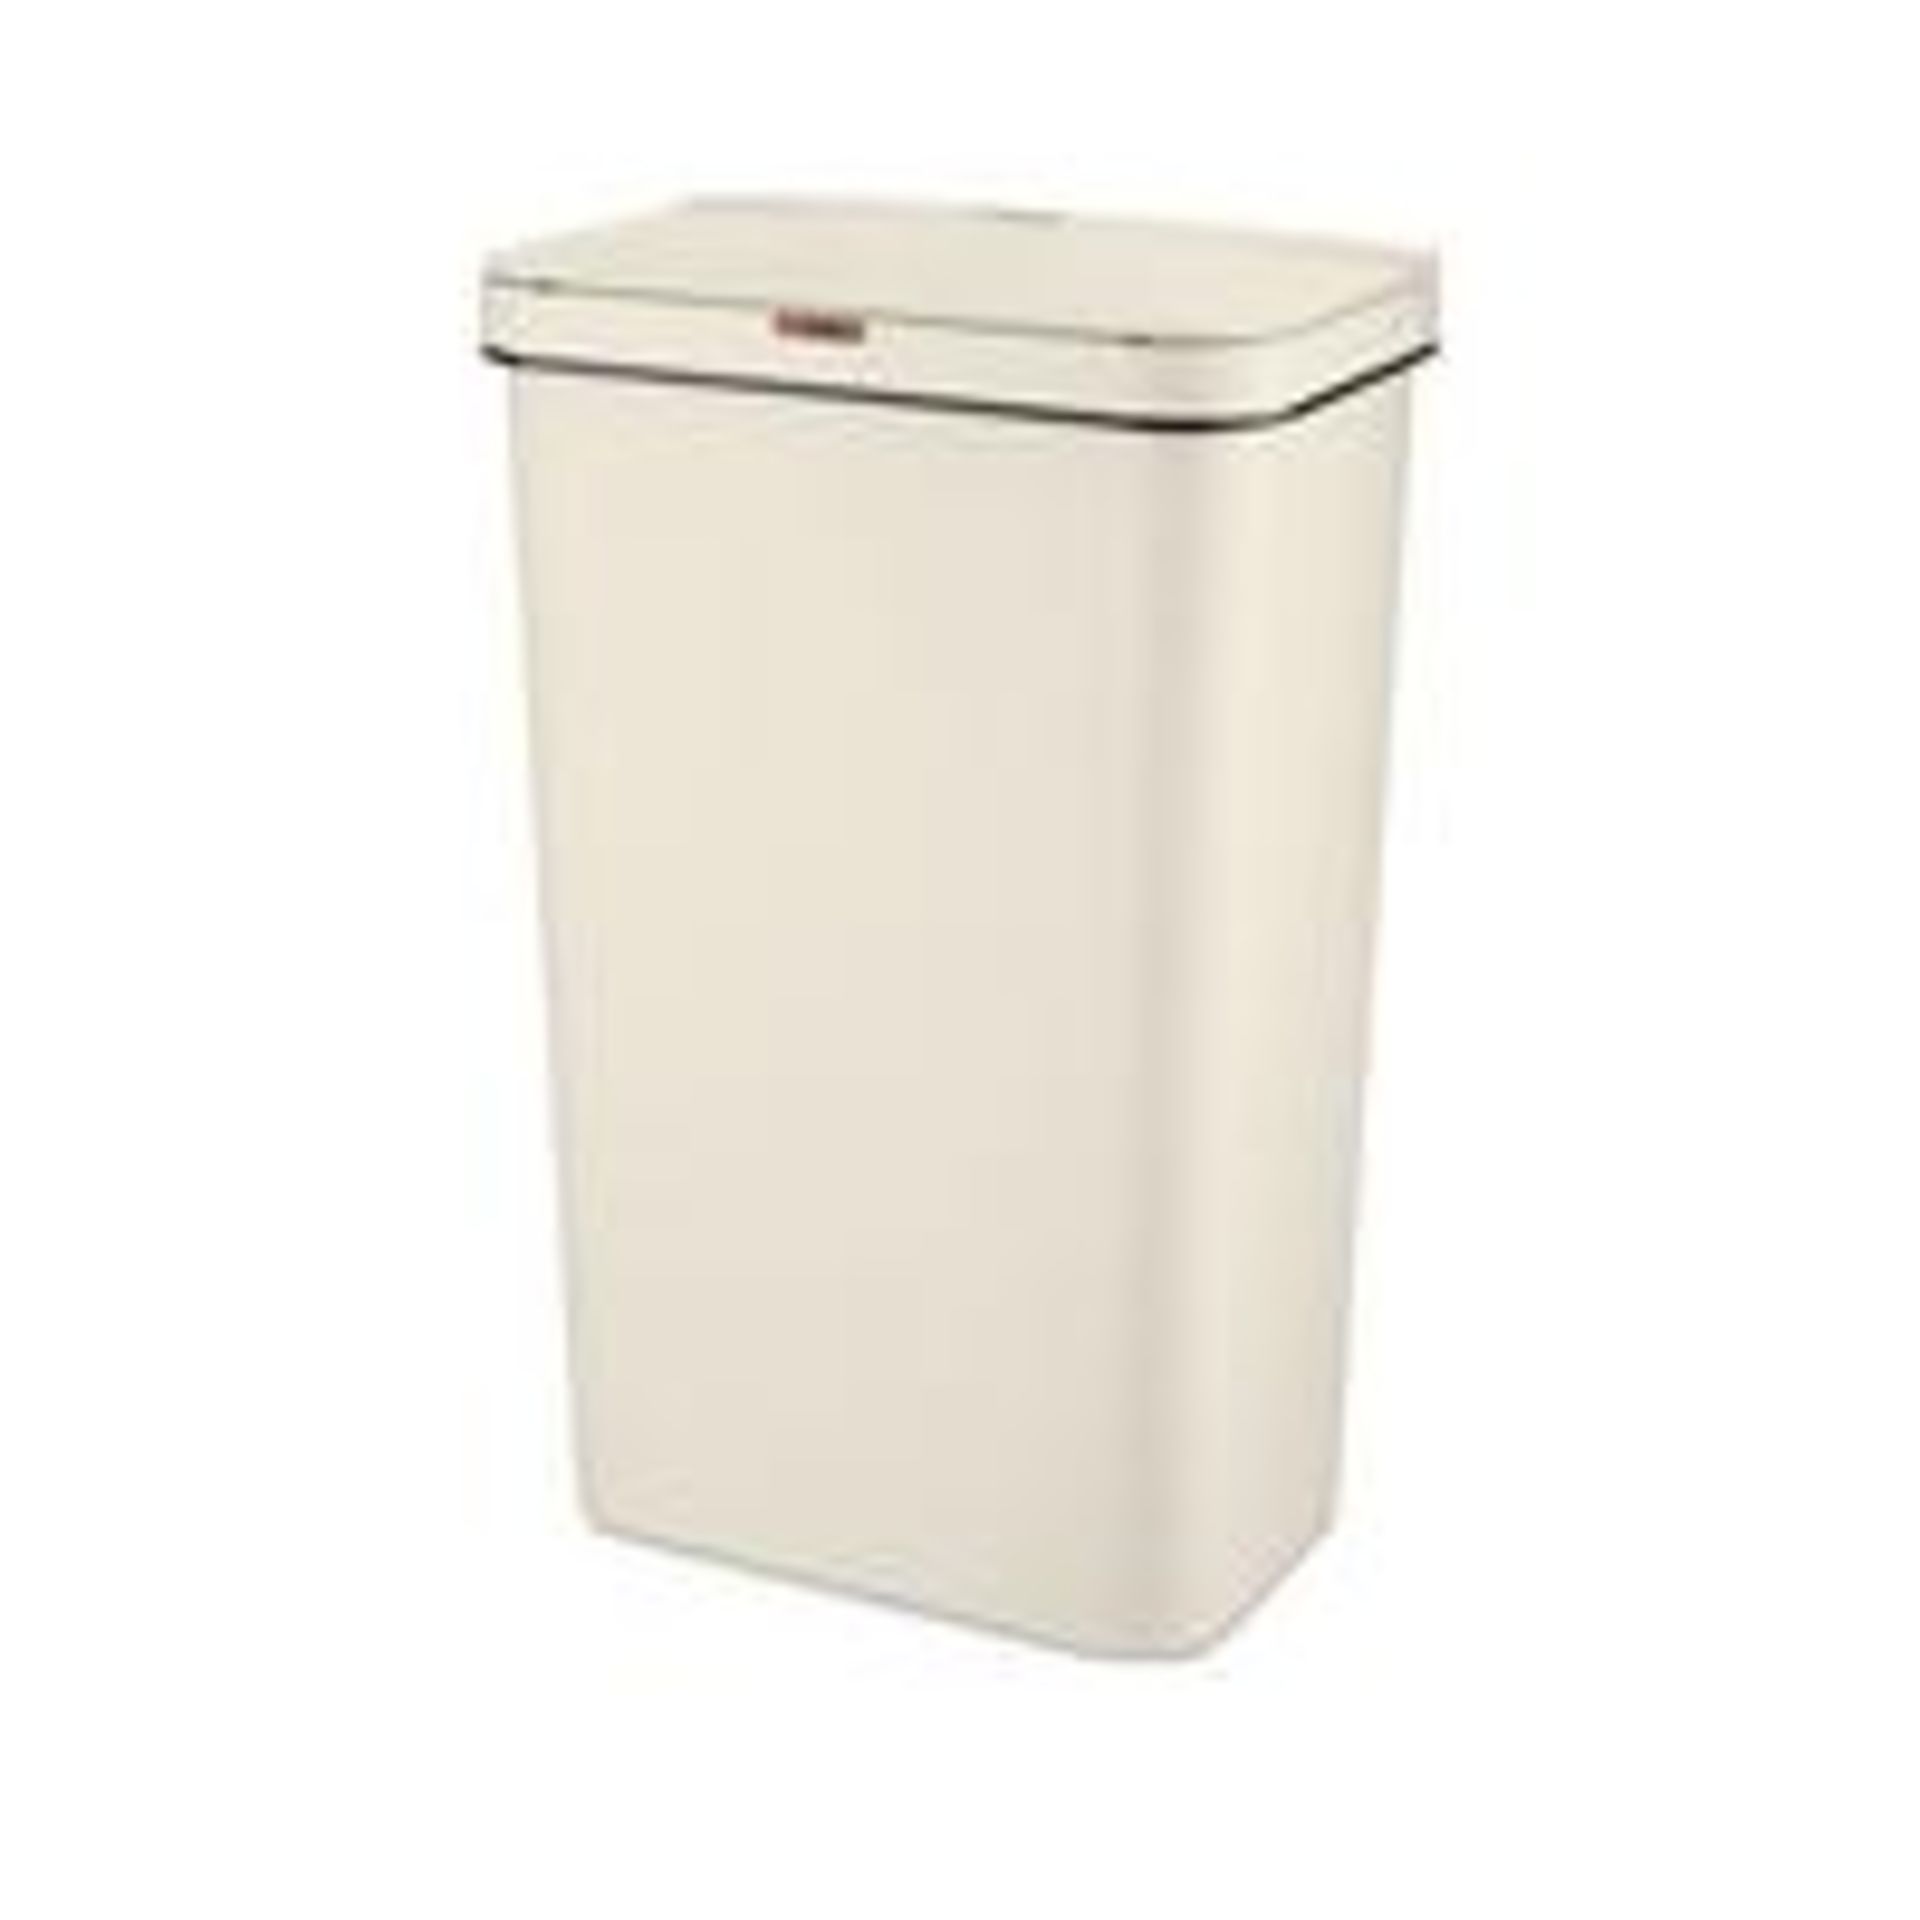 BOXED TOWER 50 LITRE SENSOR BIN RRP £44.99Condition ReportAppraisal Available on Request- All